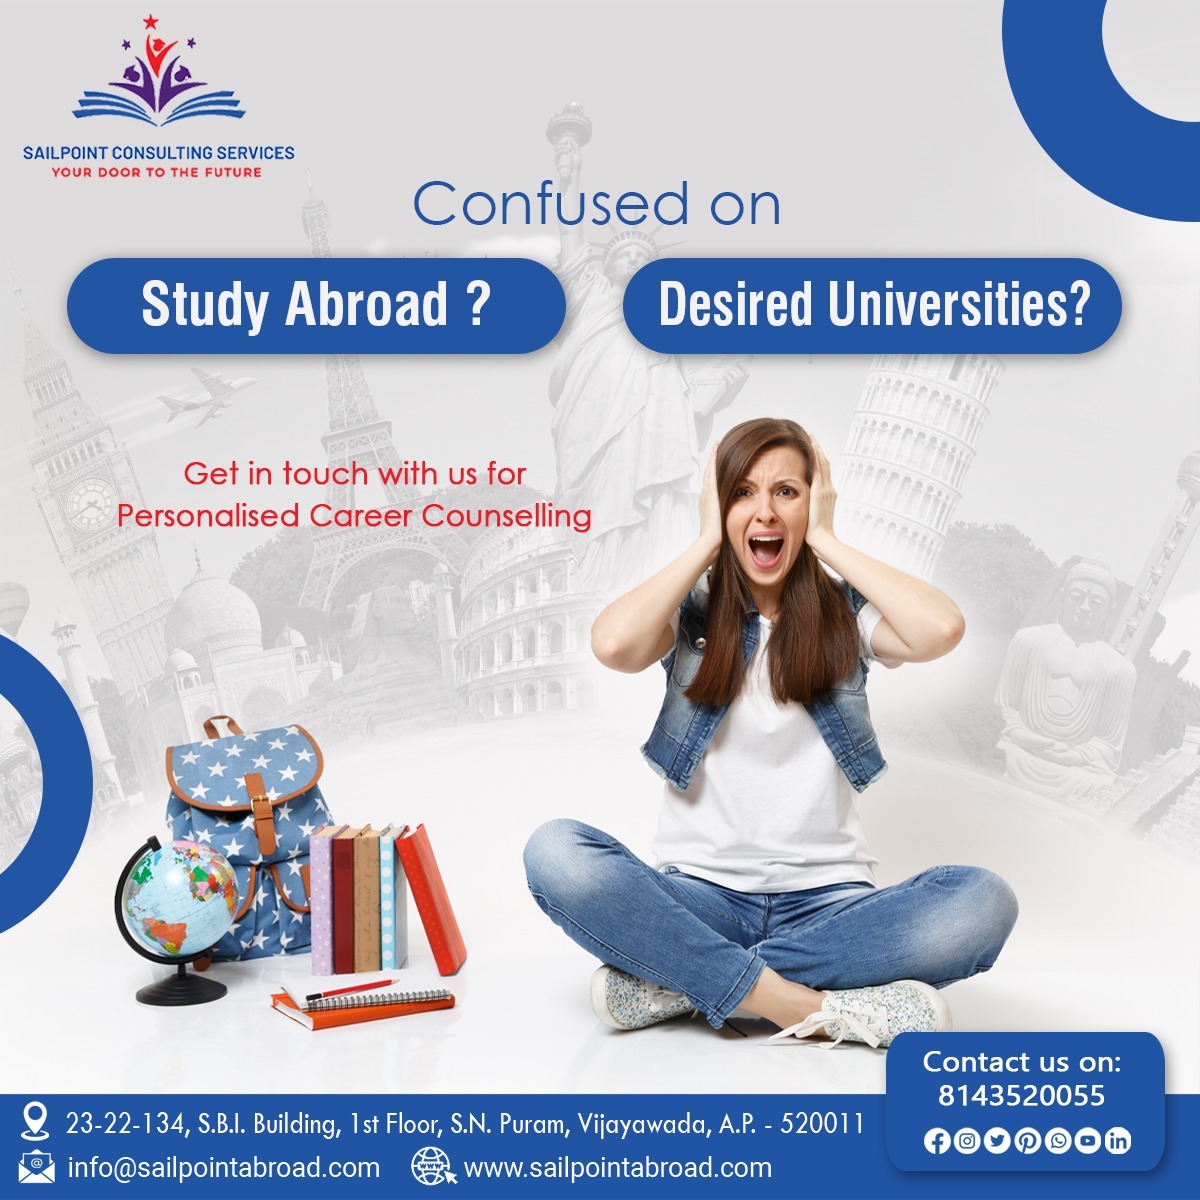 Confused on Study Abroad? Desired Universities?

#abroadstudies #sailpointconsultancy #sailpointconsultingservices #education #educationispower #abroad #studymotivation #consultingservices #studymotivation #study #abroadstudiesconsultants #abroadstudiesconsultancy #abroad